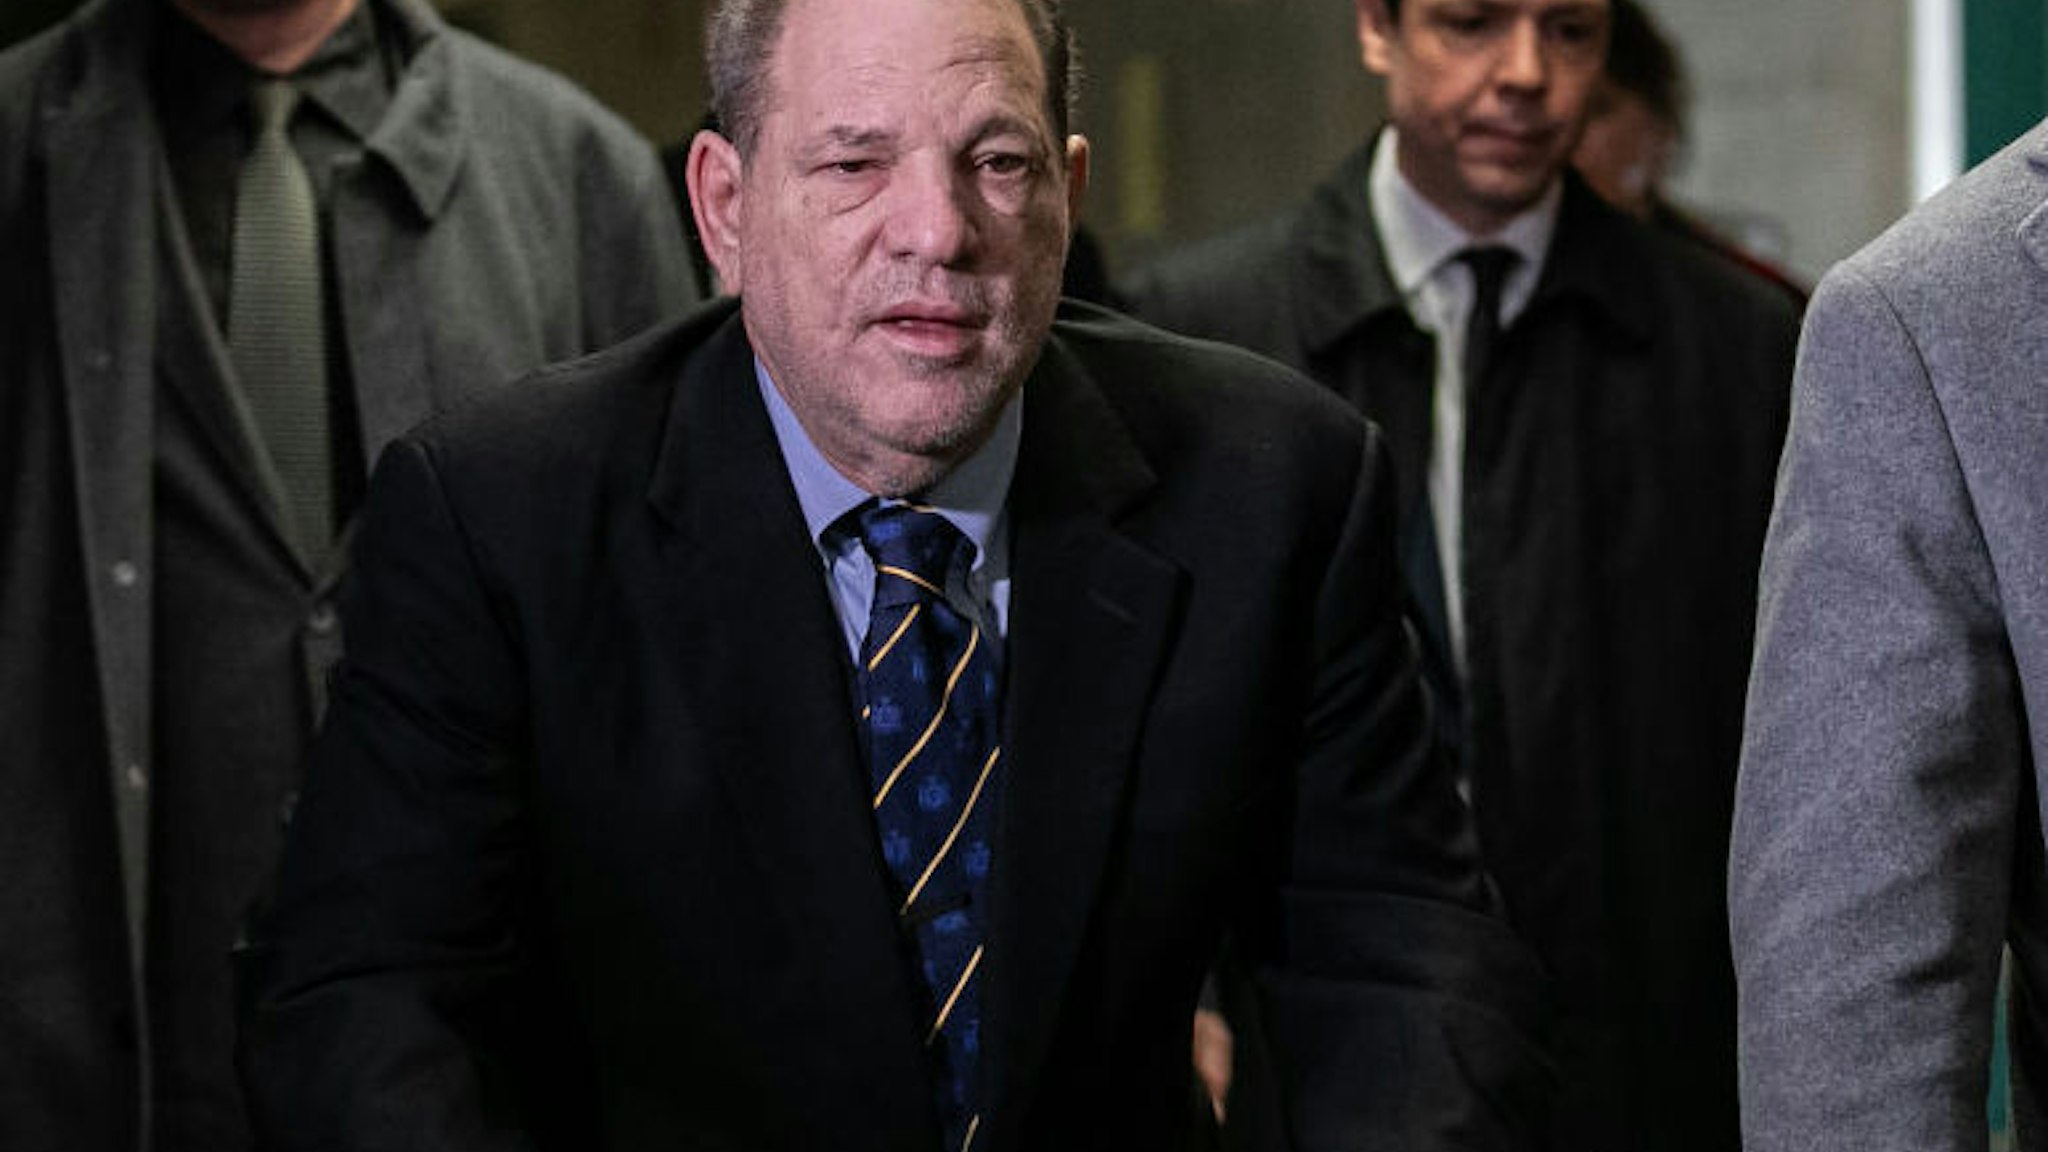 NEW YORK, NY - JANUARY 24: Harvey Weinstein arrives at New York City Criminal Court for the continuation of this trial on January 24, 2020 in New York City. Weinstein, a movie producer whose alleged sexual misconduct helped spark the #MeToo movement, pleaded not-guilty on five counts of rape and sexual assault against two unnamed women and faces a possible life sentence in prison.